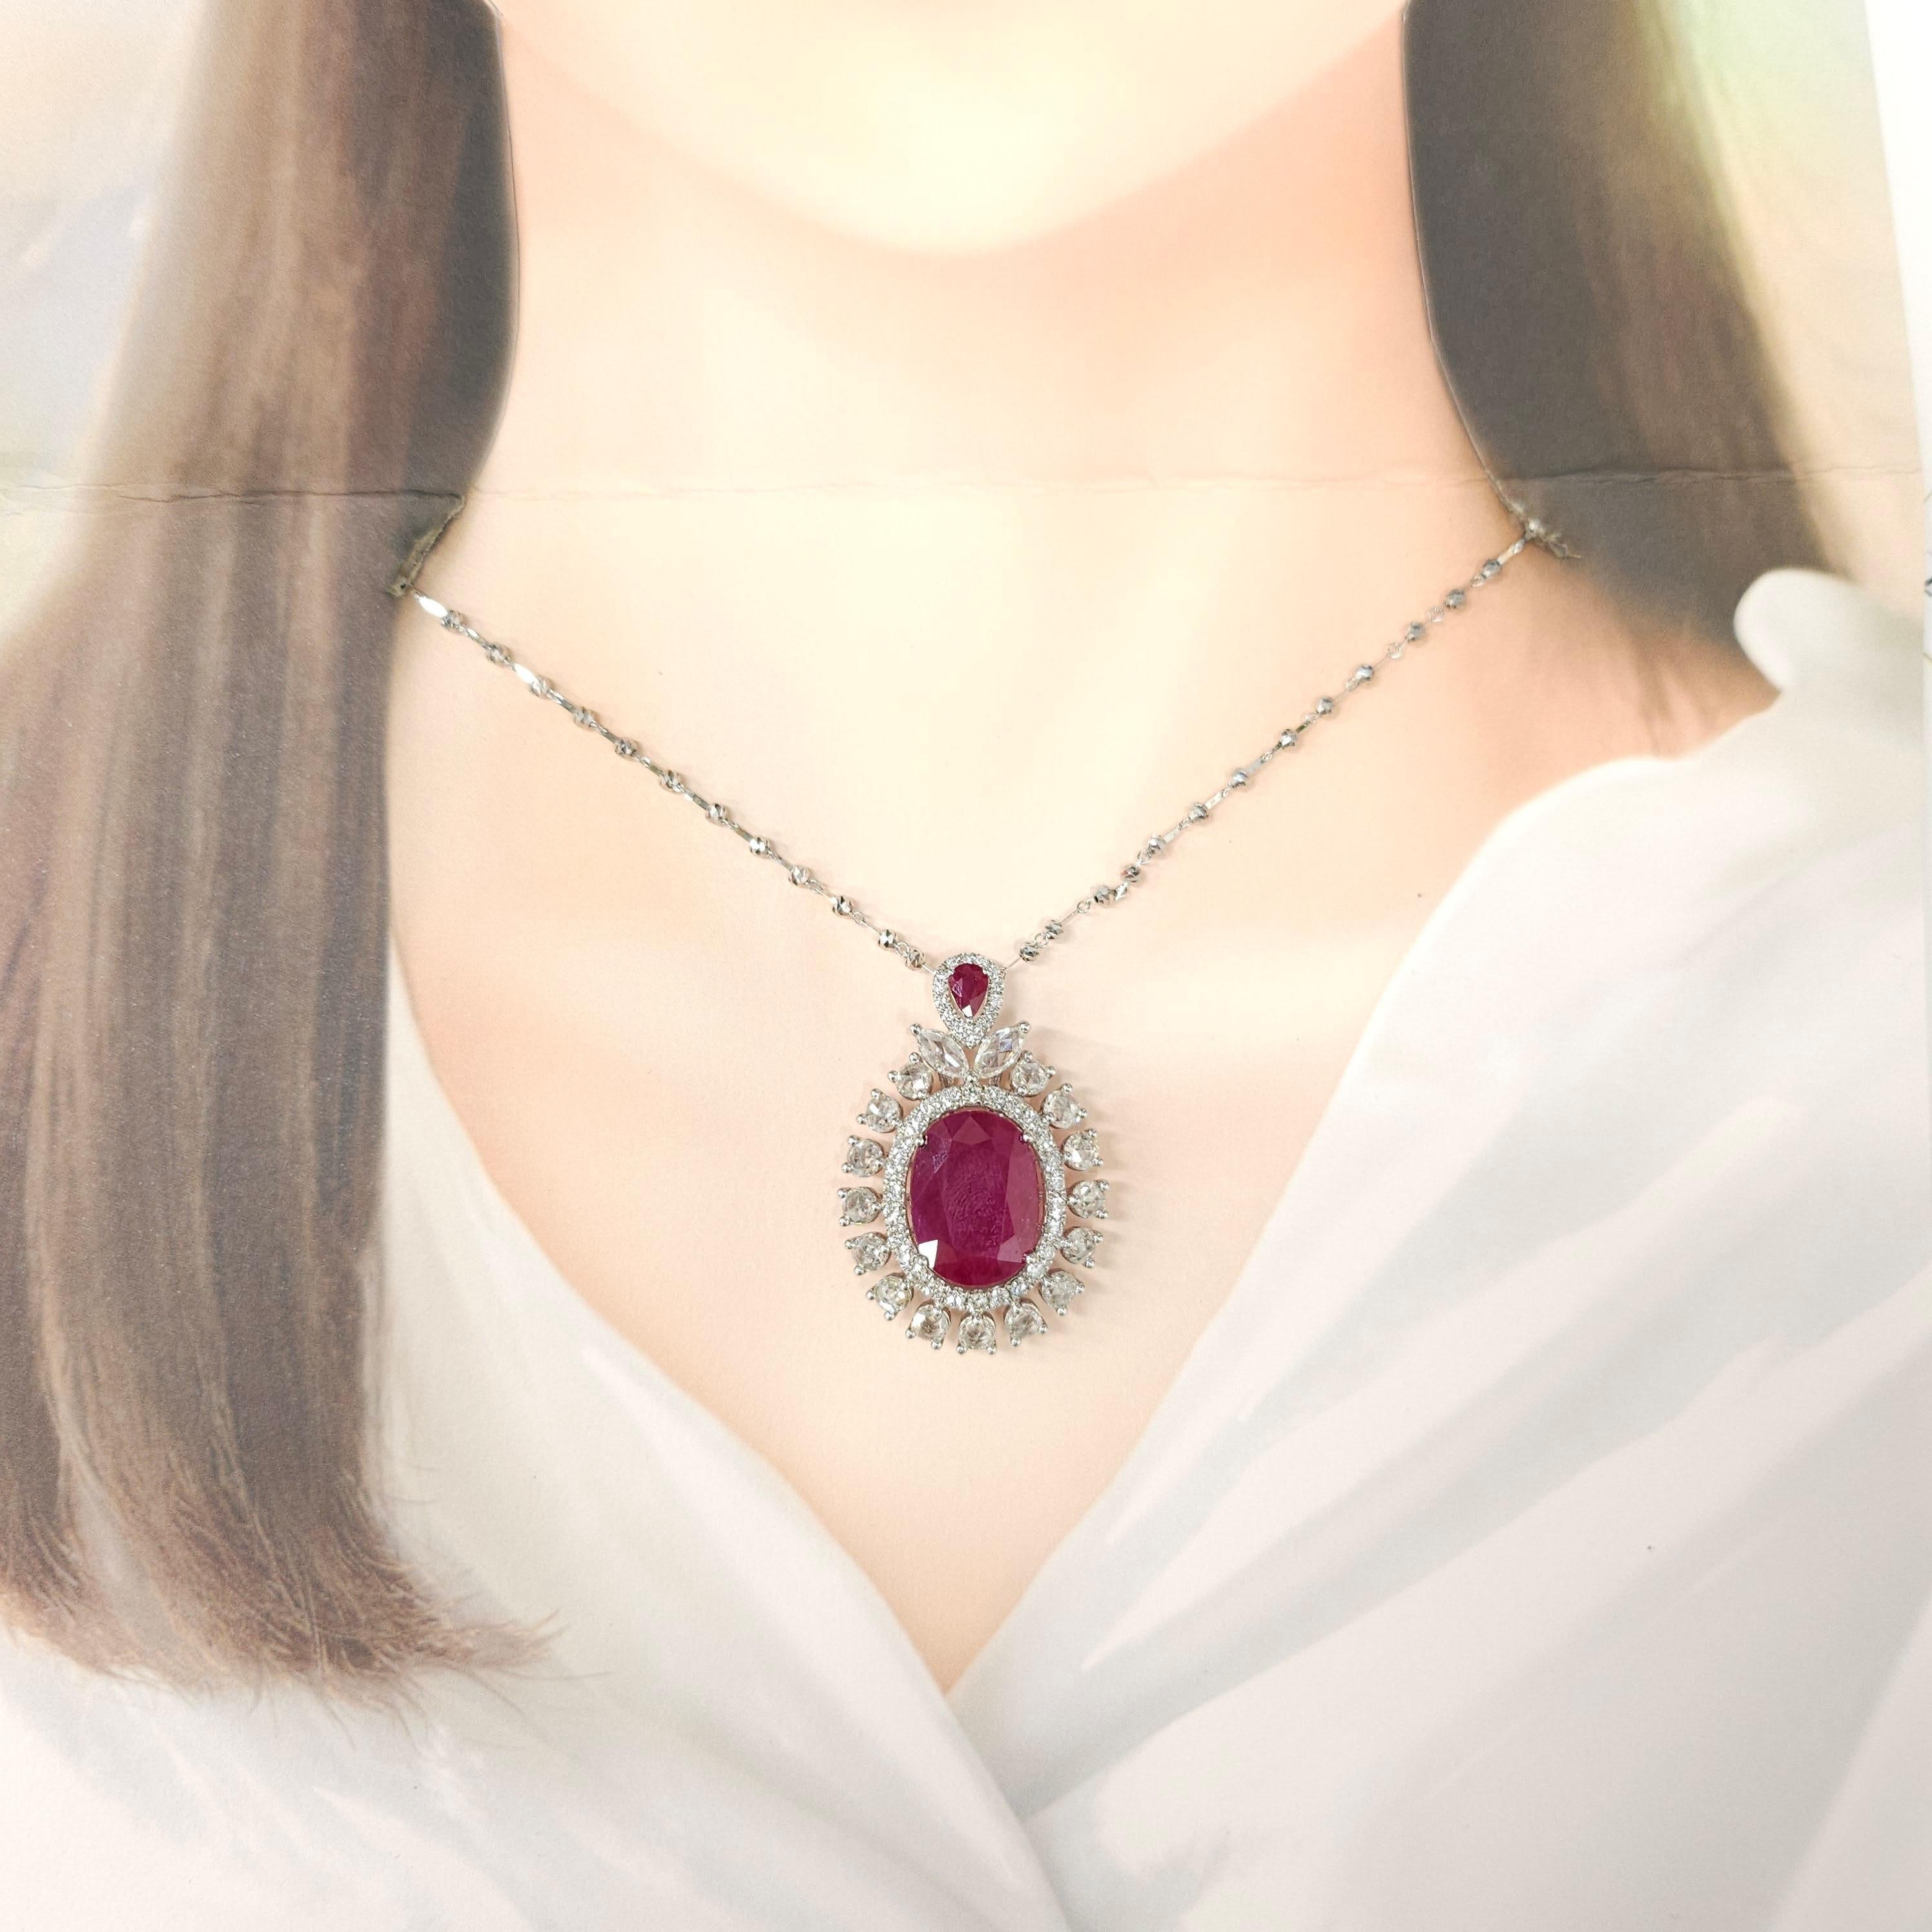 Prepare to be captivated by the allure of this IGI Certified 11.03 Carat natural Ruby pendant, showcasing a captivating intense purplish-red color in a captivating oval shape. Set against the backdrop of lustrous 18K white gold, this pendant is a